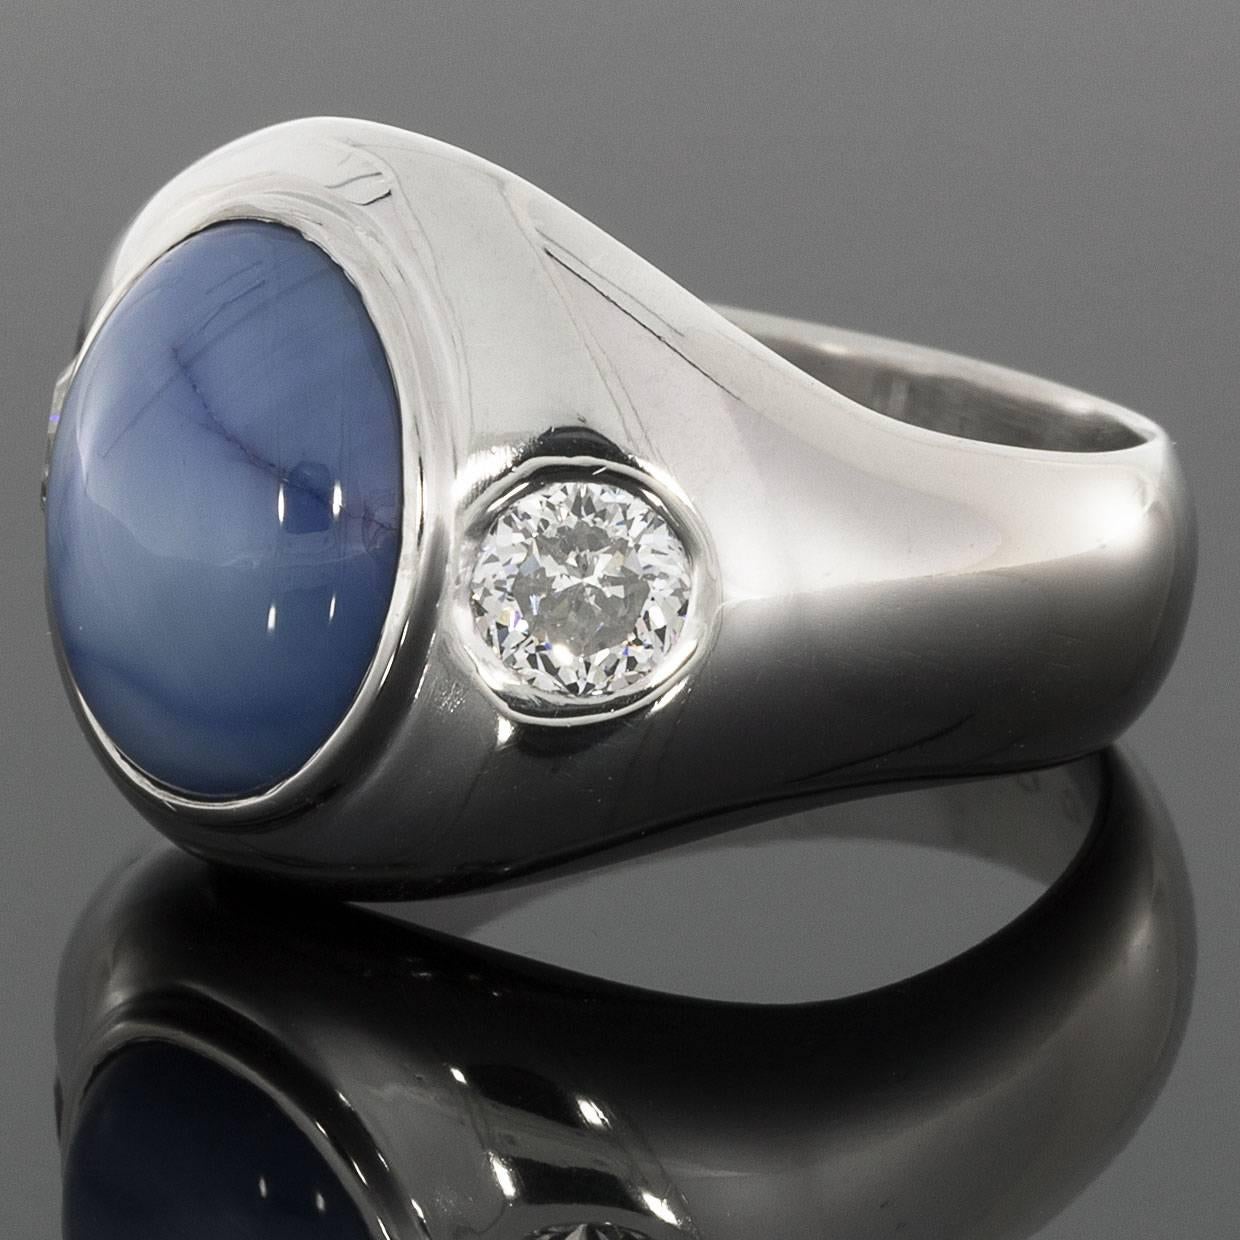 This awesome ring features an 8 carat, natural, oval cabochon cut, blue star sapphire. This gorgeous sapphire is bezel set in custom made, platinum gents ring. This ring also features 2 specialty, J.C. Millennium cut diamonds that have a combined